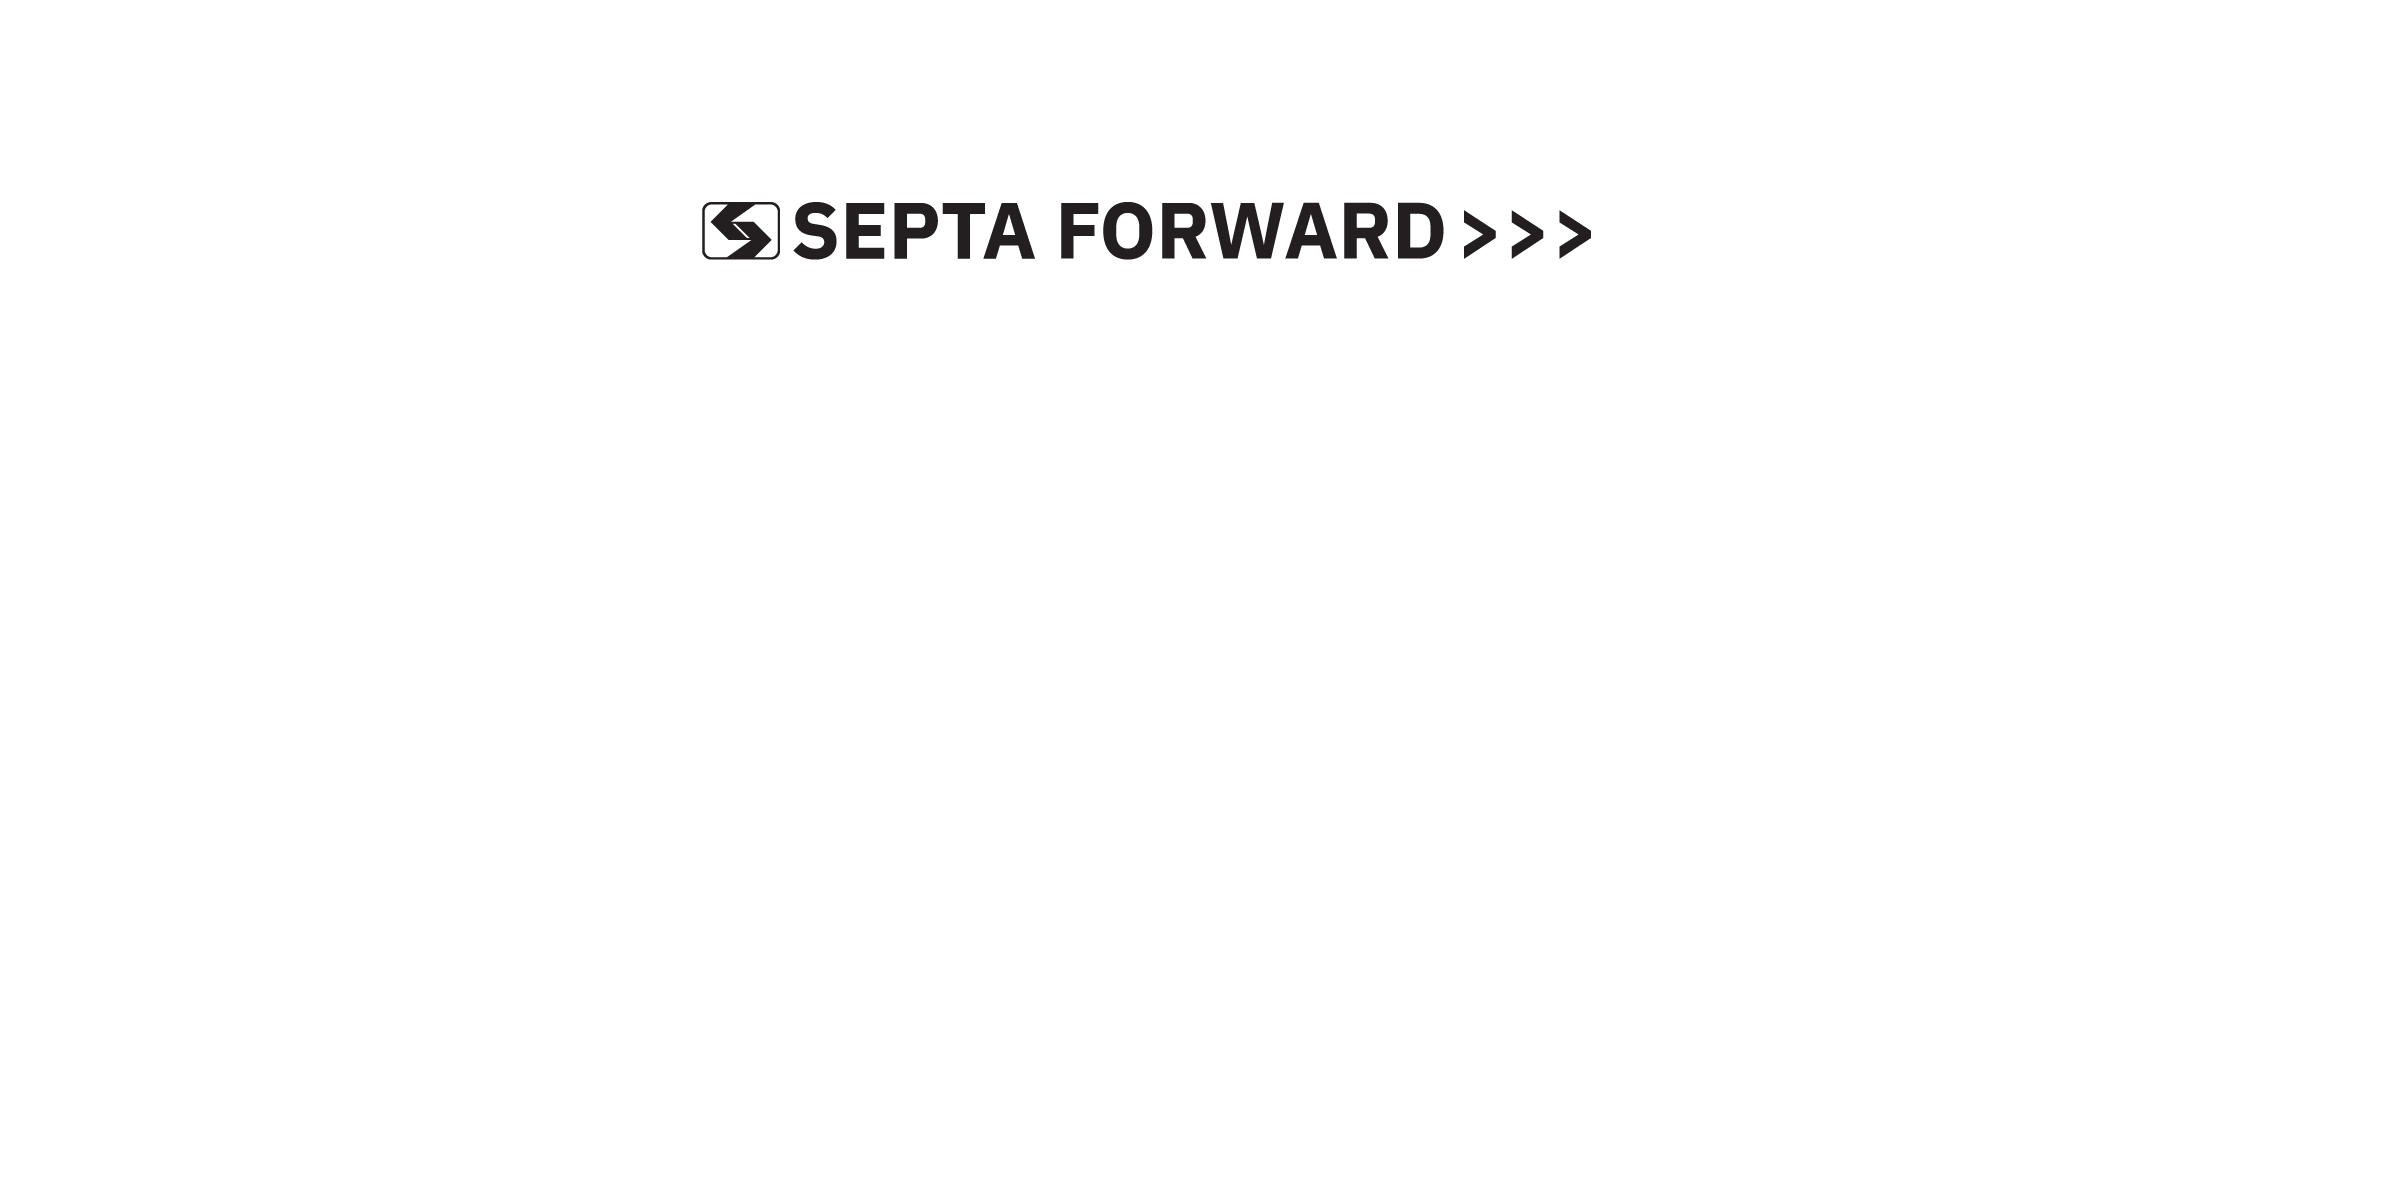 King of Prussia Rail. Connecting Community with Opportunity.